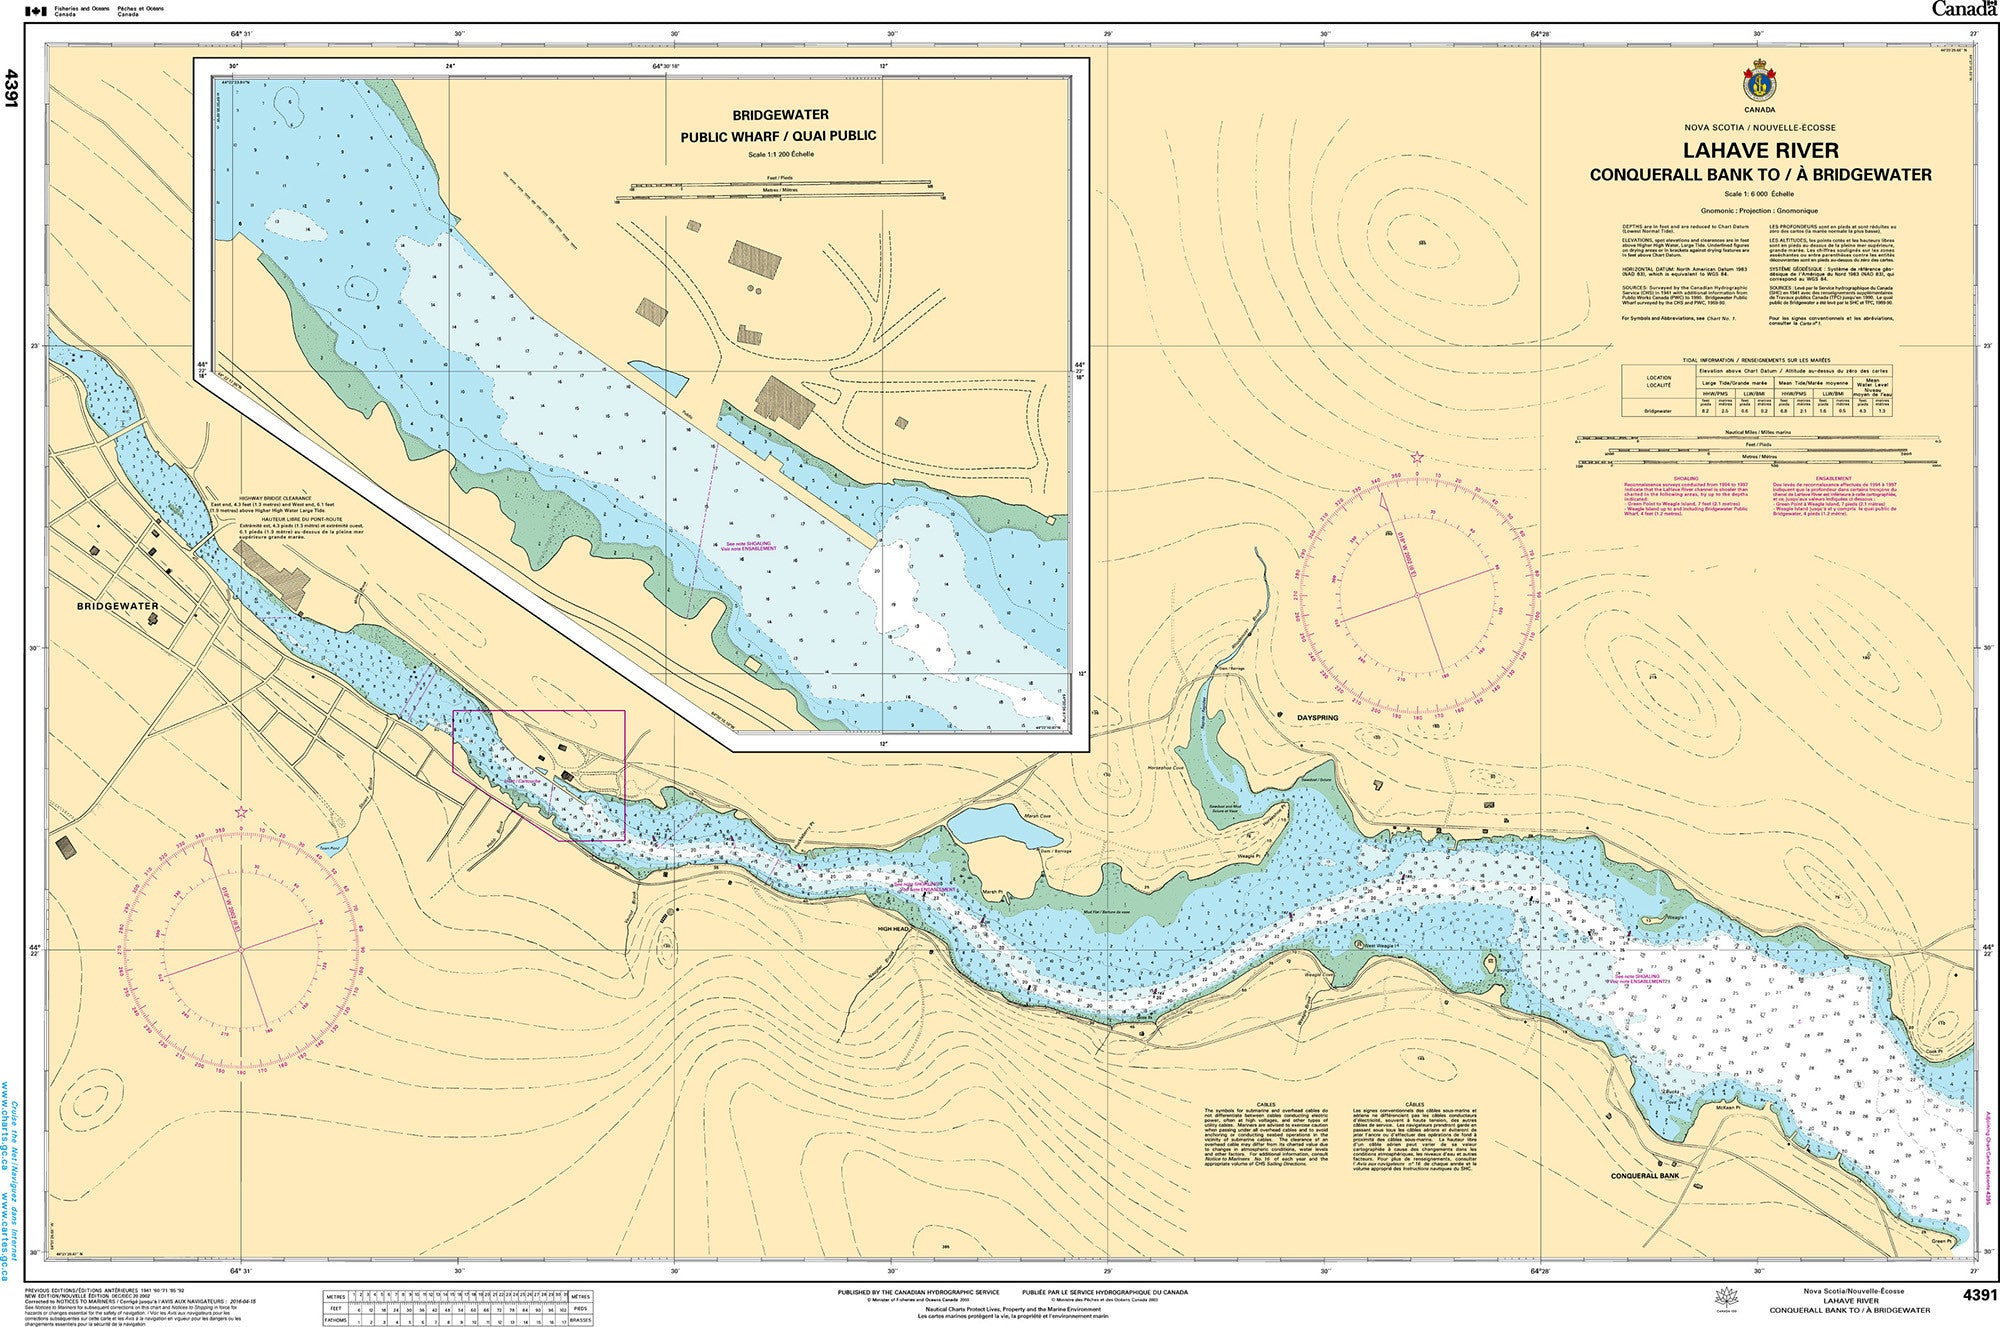 Canadian Hydrographic Service Nautical Chart CHS4391: LaHave River - Conquerall Bank to Bridgewater